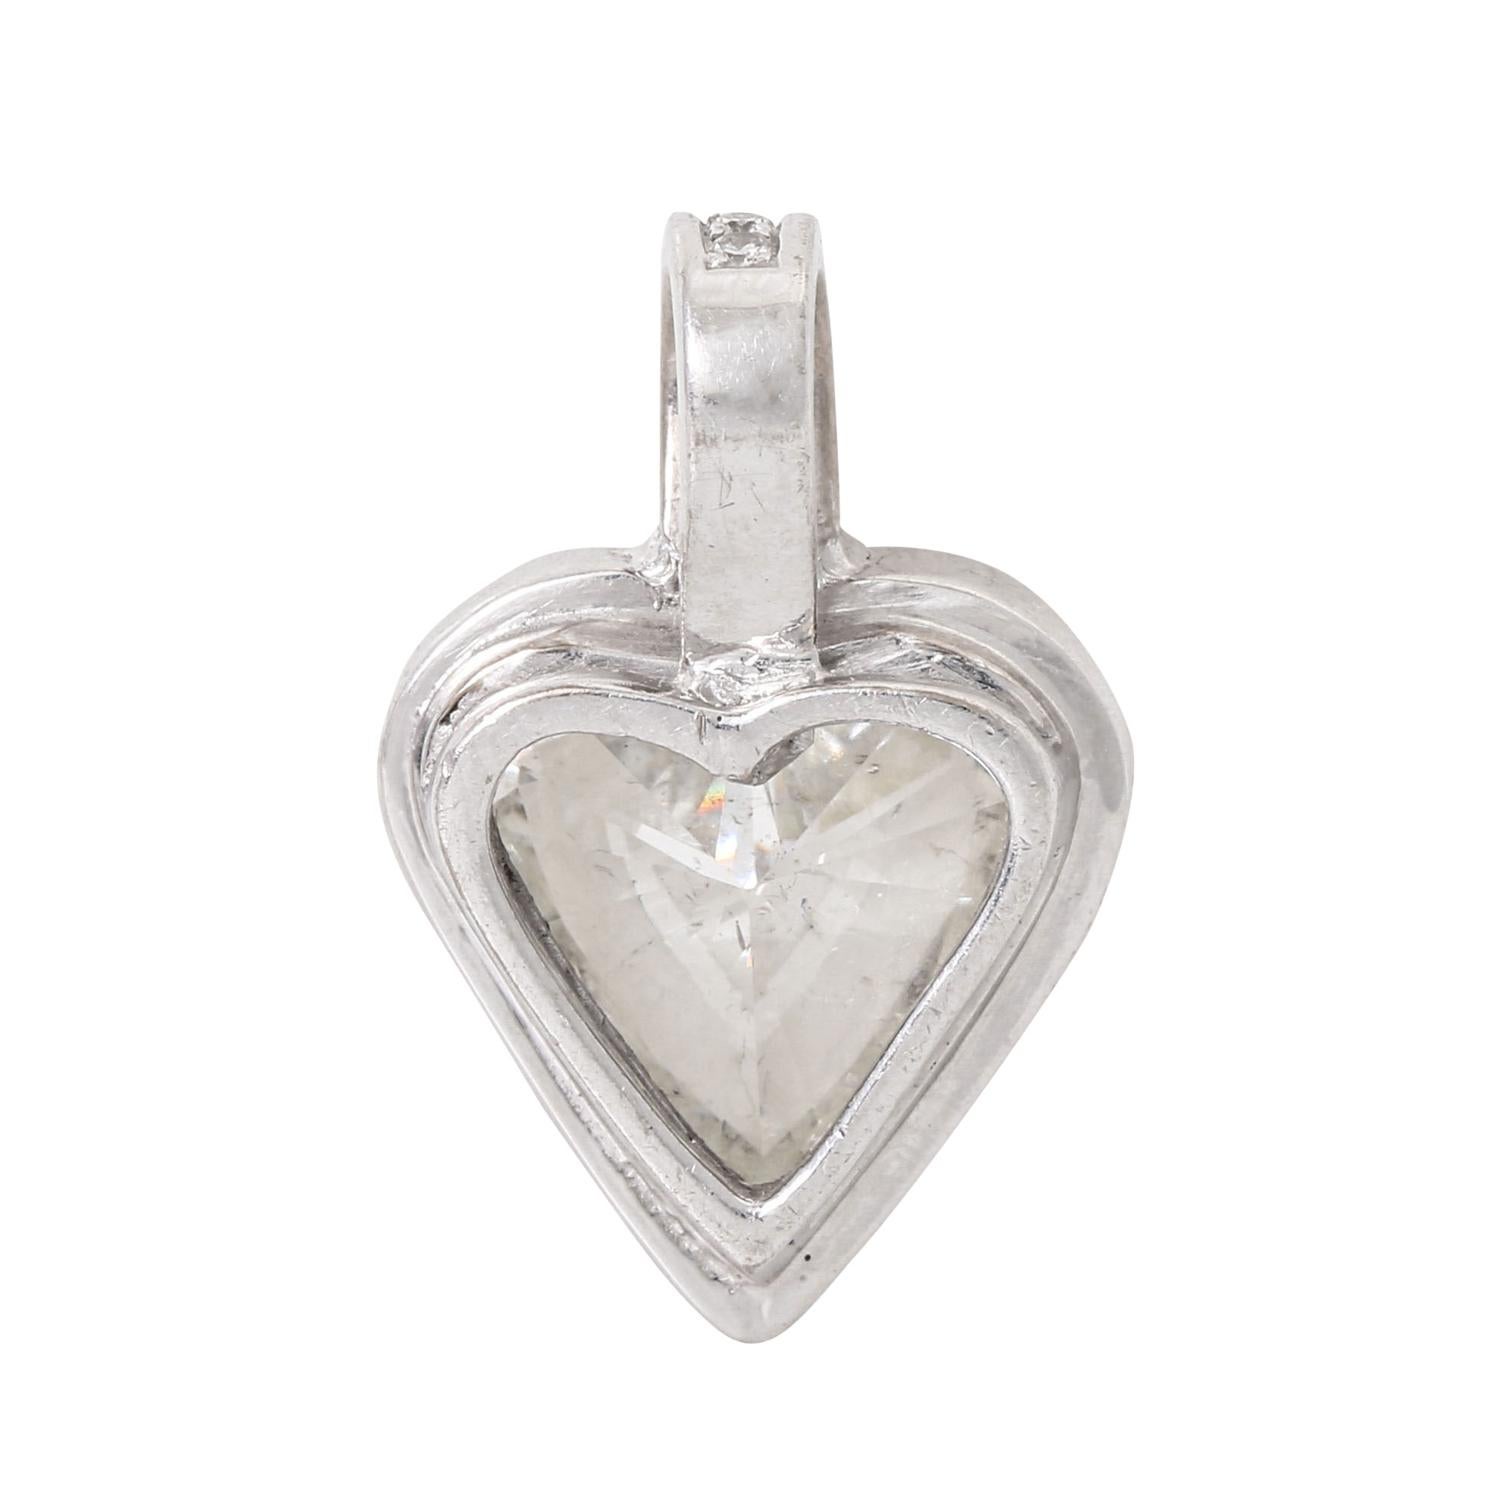 approx. 3.0 cts. LG-Weiss I/Si and other diamonds in the brilliant and eight-cant cutting also approx. 0.30 ct. FW/VSI. WG 5.9G, LXB 24 x 15mm, 21st century, slight traces of carrying, manual work.

 Pendant with Heart-Shaped Cut Diamond approx. 3.0